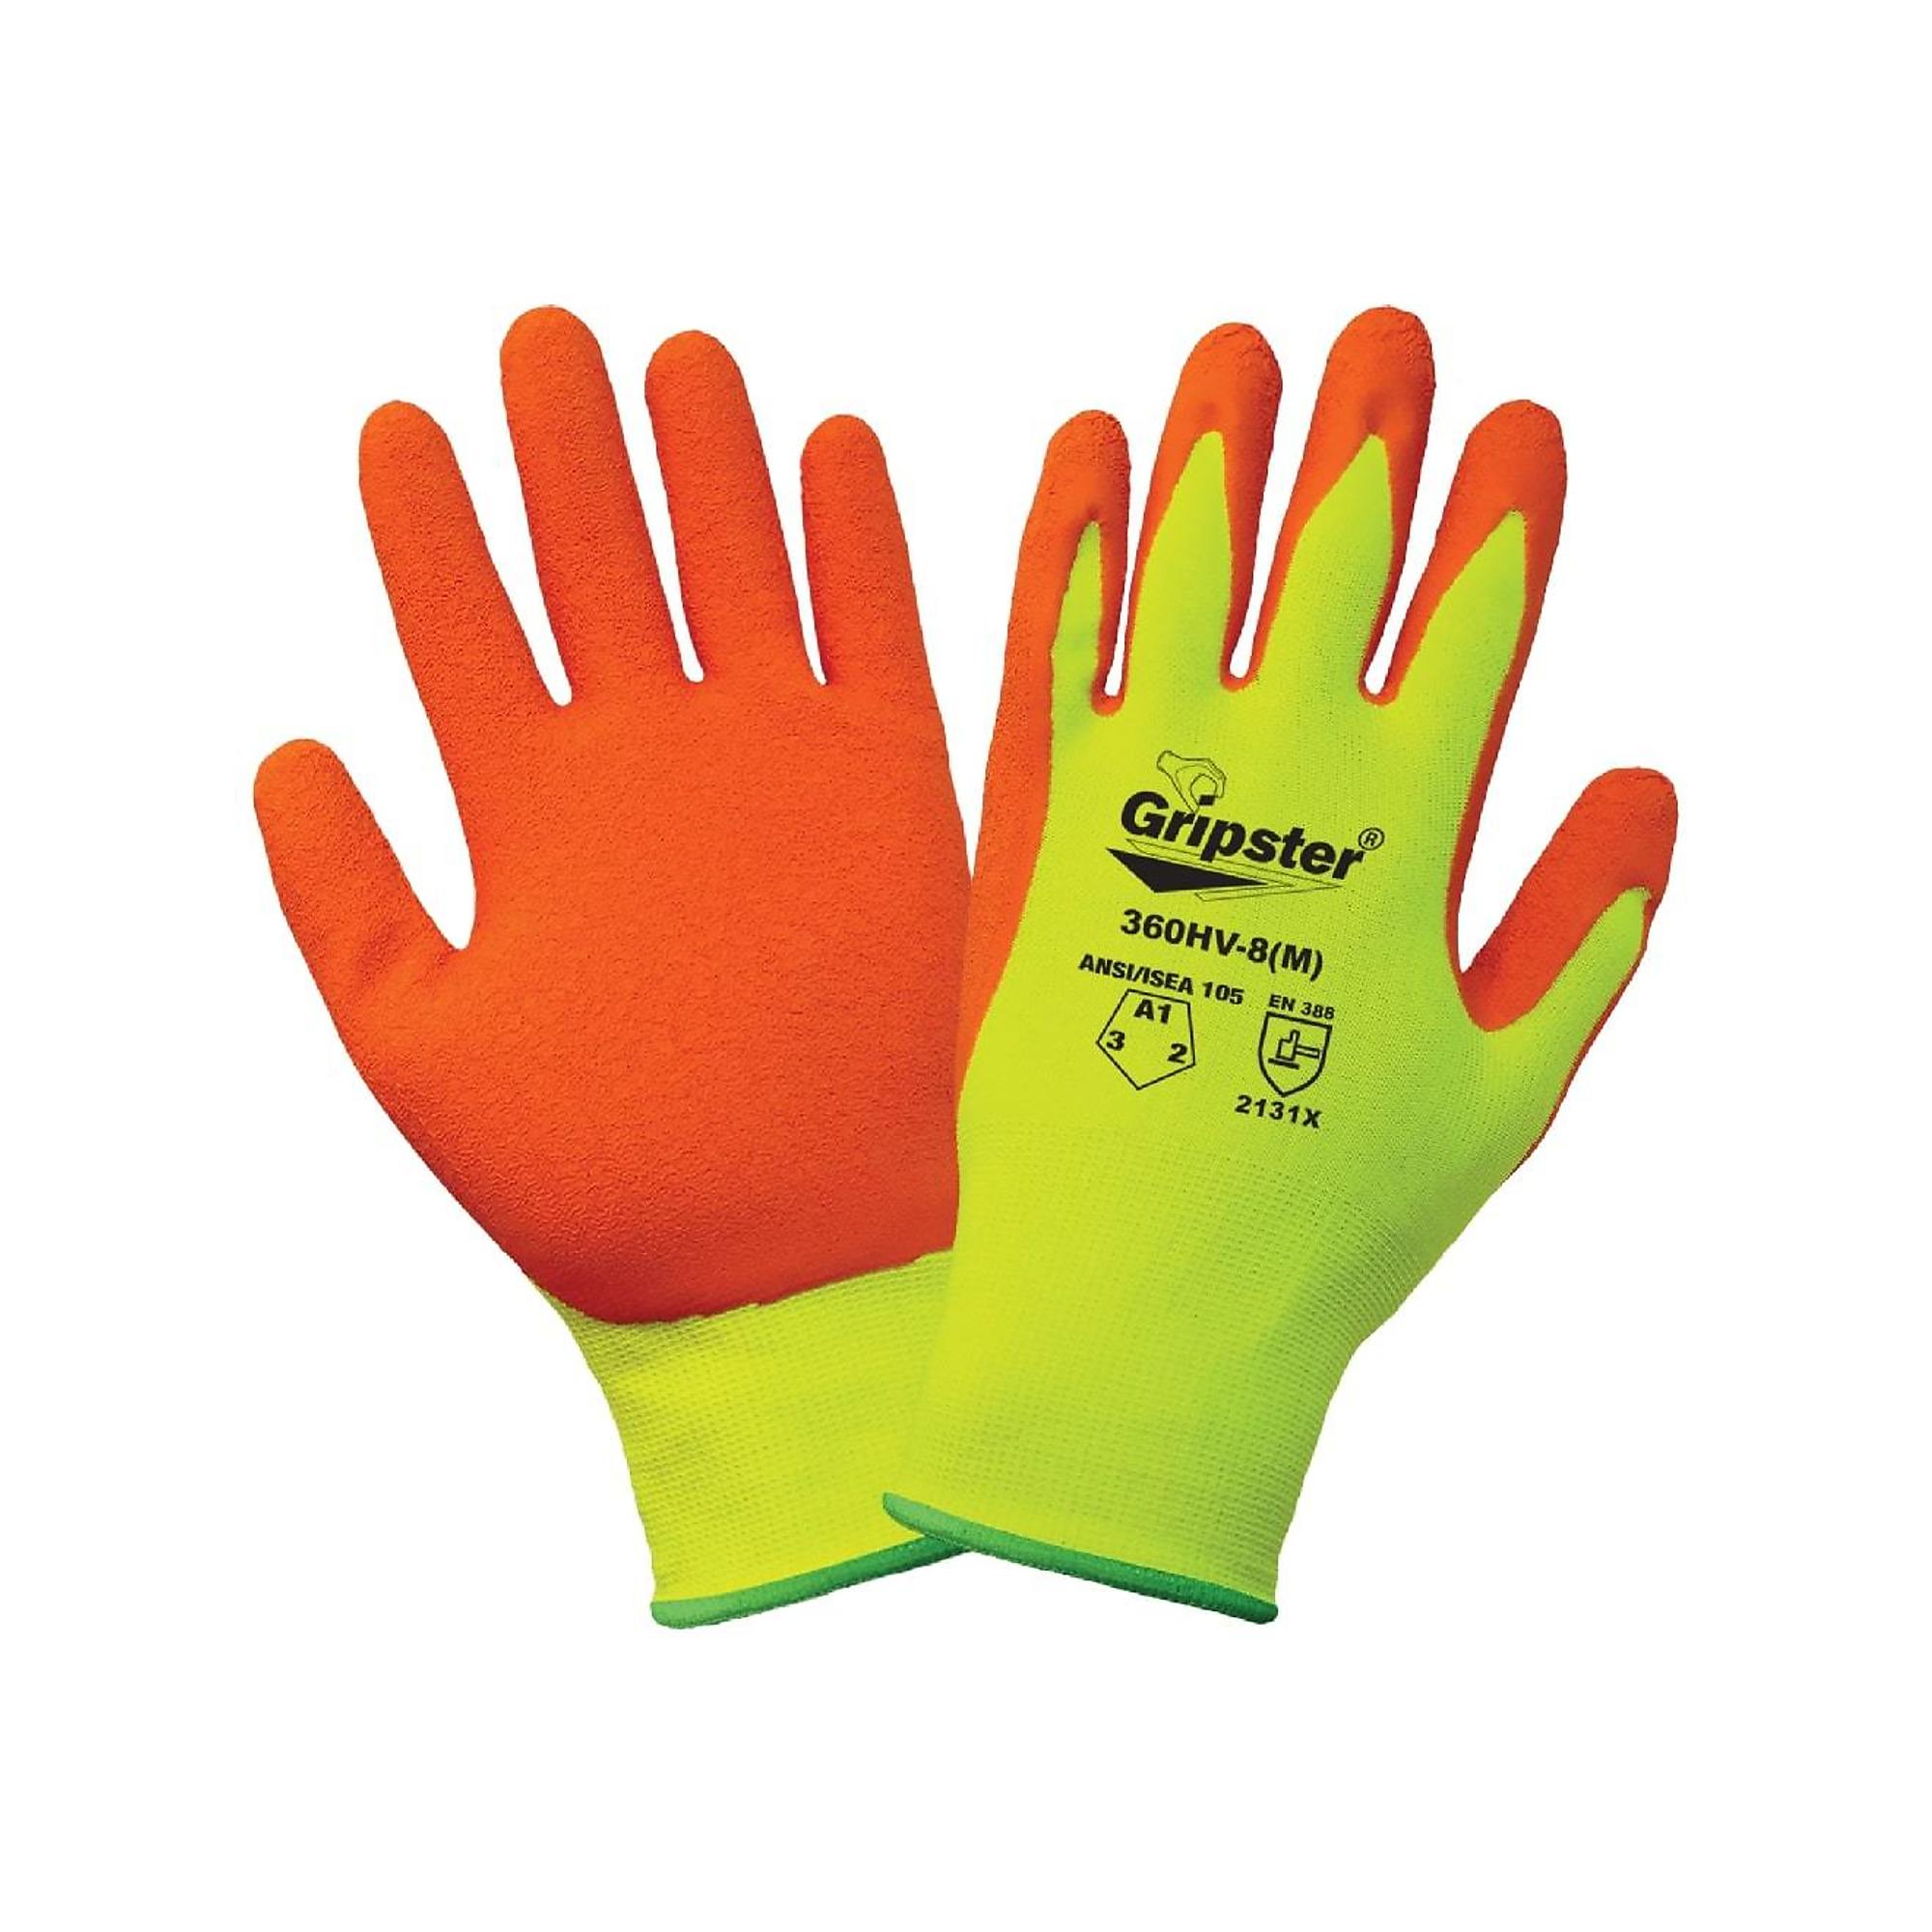 Global Glove Gripster , HV Yel, Org Rubber Palm, Cut Resistant A1 Gloves - 12 Pairs, Size M, Color High Visibility Yellow/Orange, Included (qty.) 12